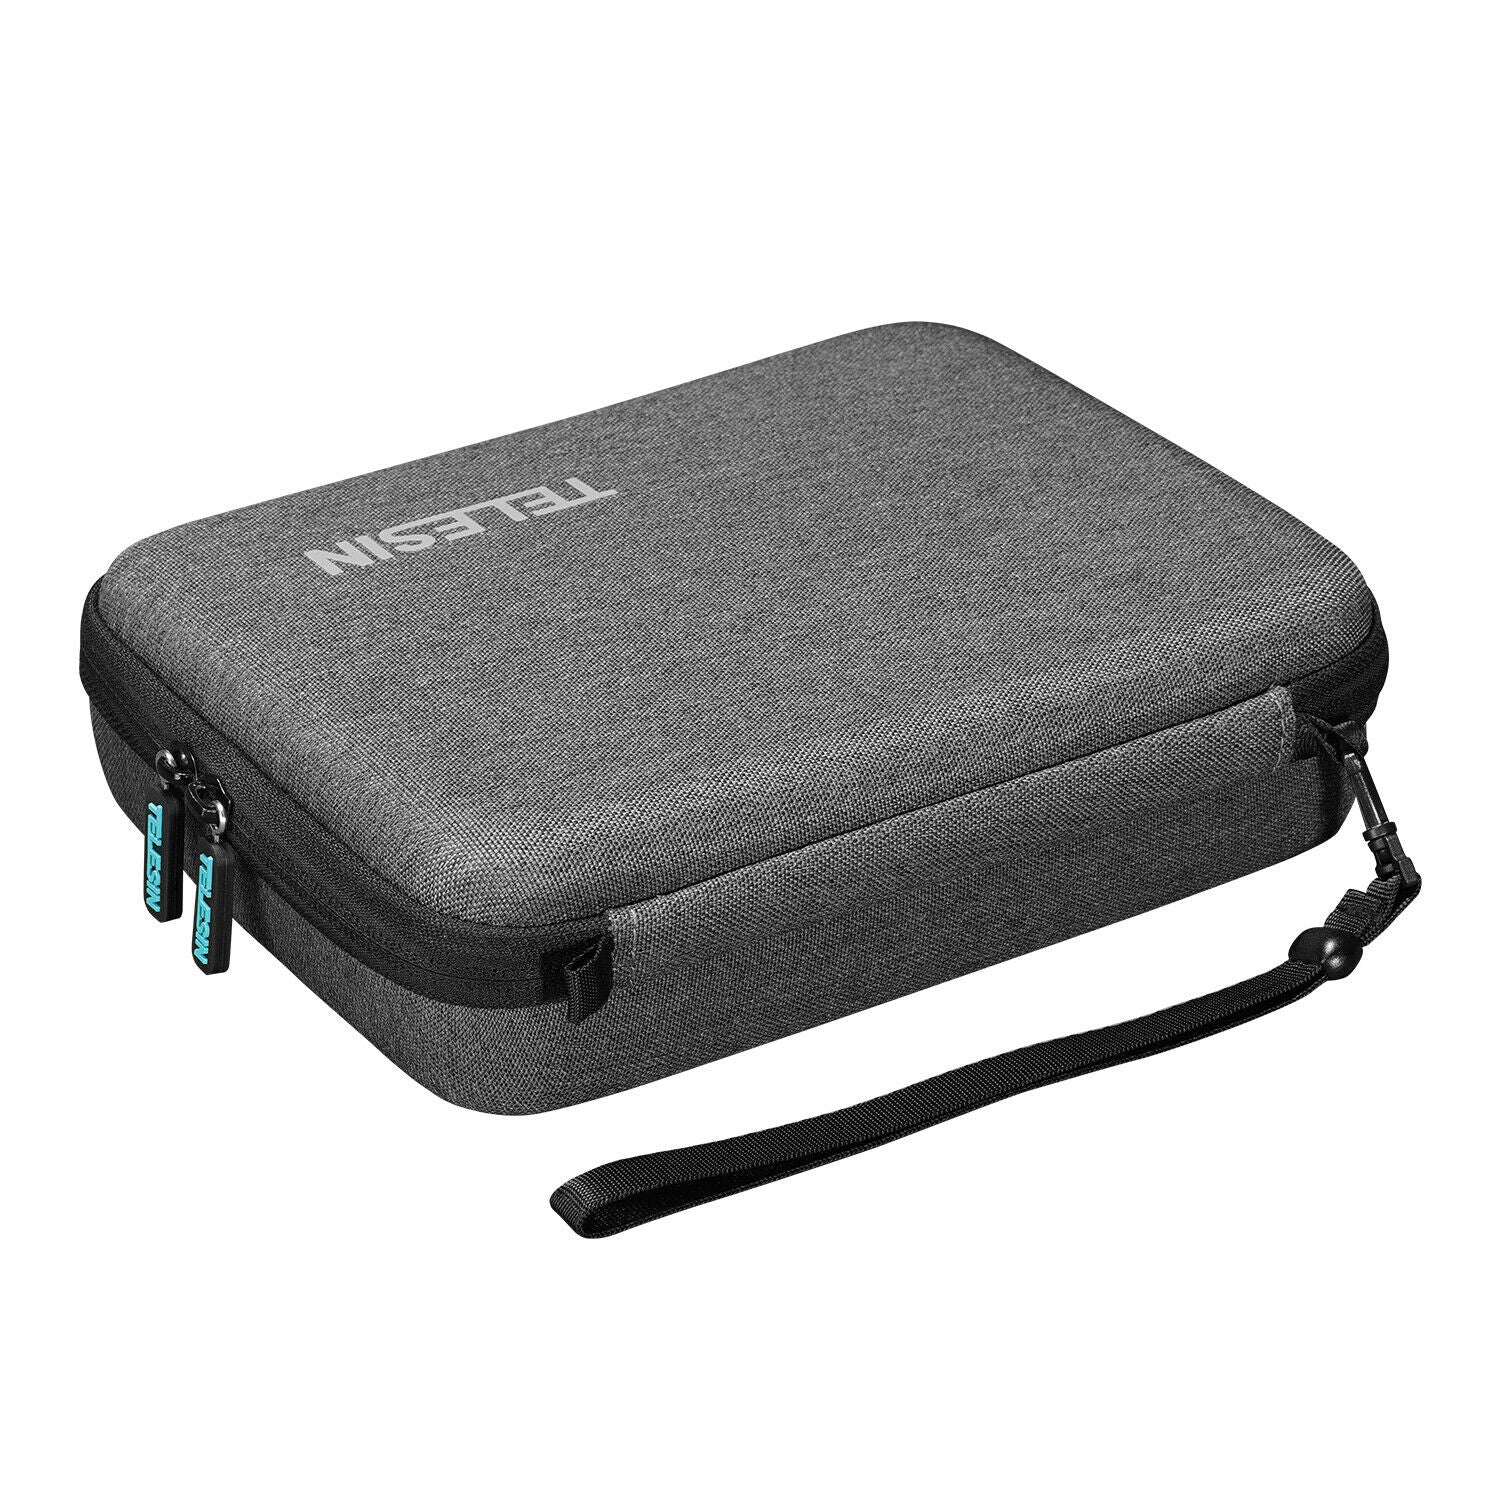 Portable Storage Bag Carrying case cover for GoPro Hero 10/9/8/7 Action Camera